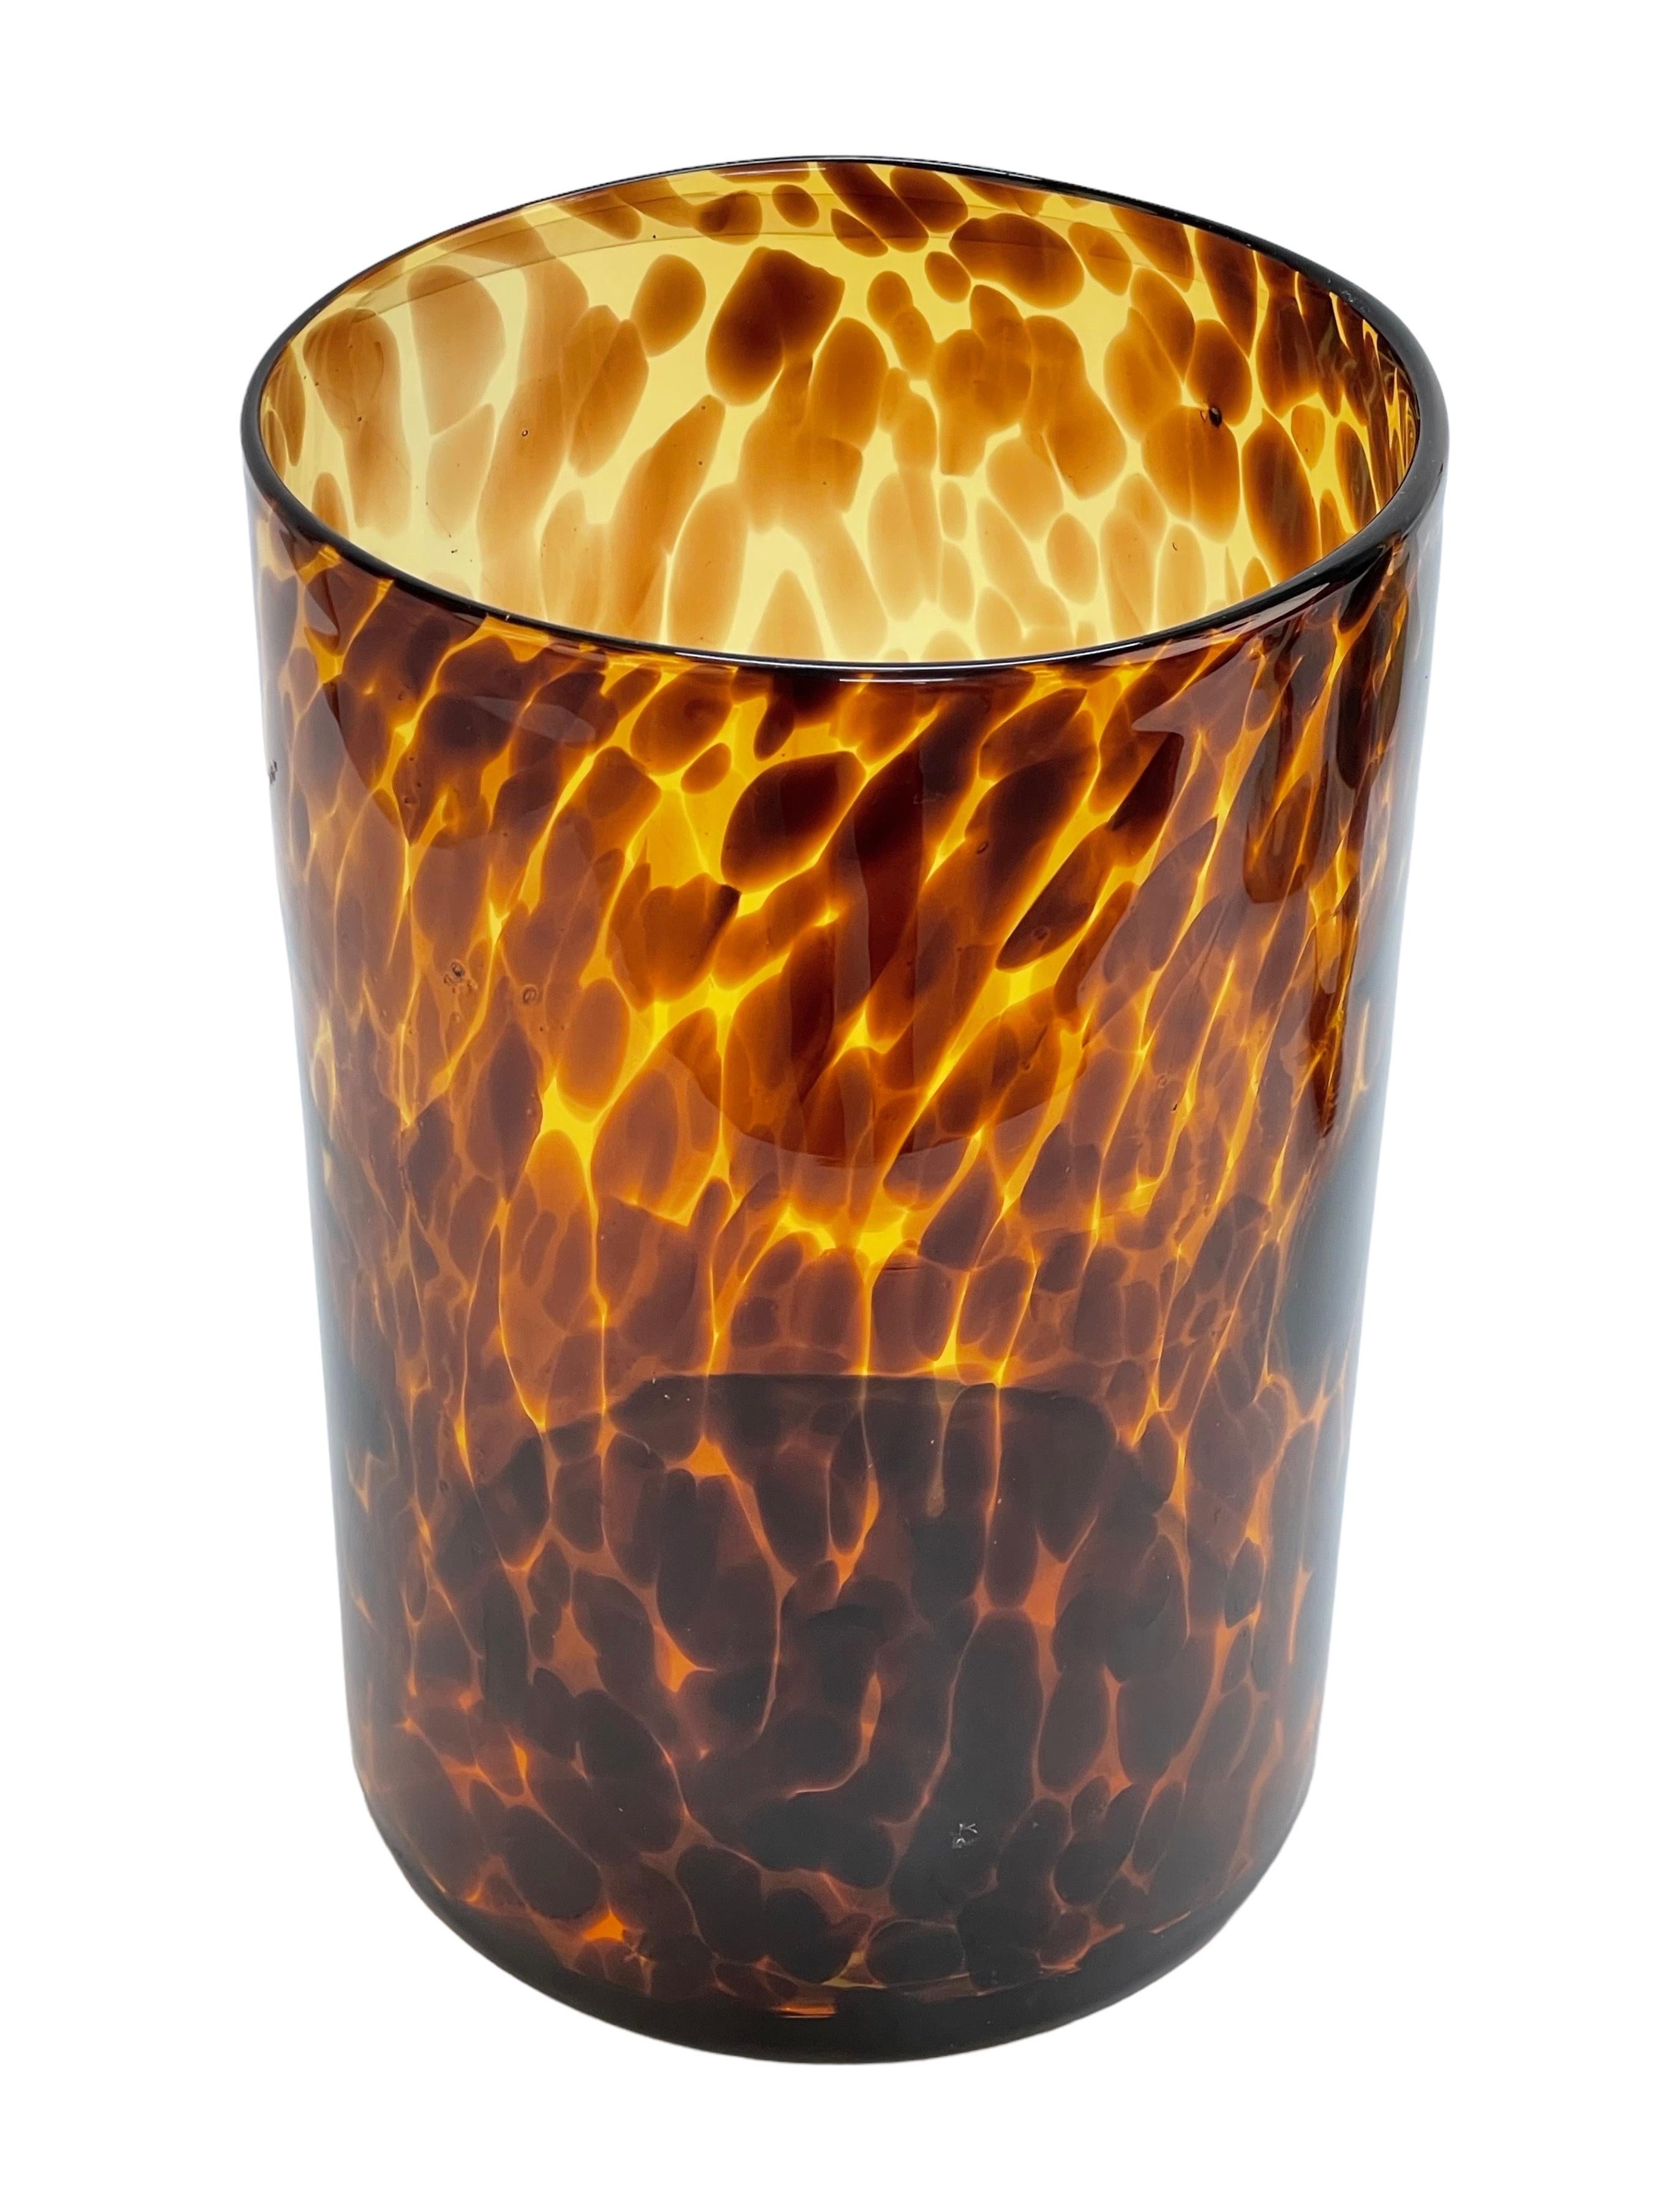 Midcentury Large Italian Orange and Brown Leopard Glass Artistic Vase, 1980s For Sale 6